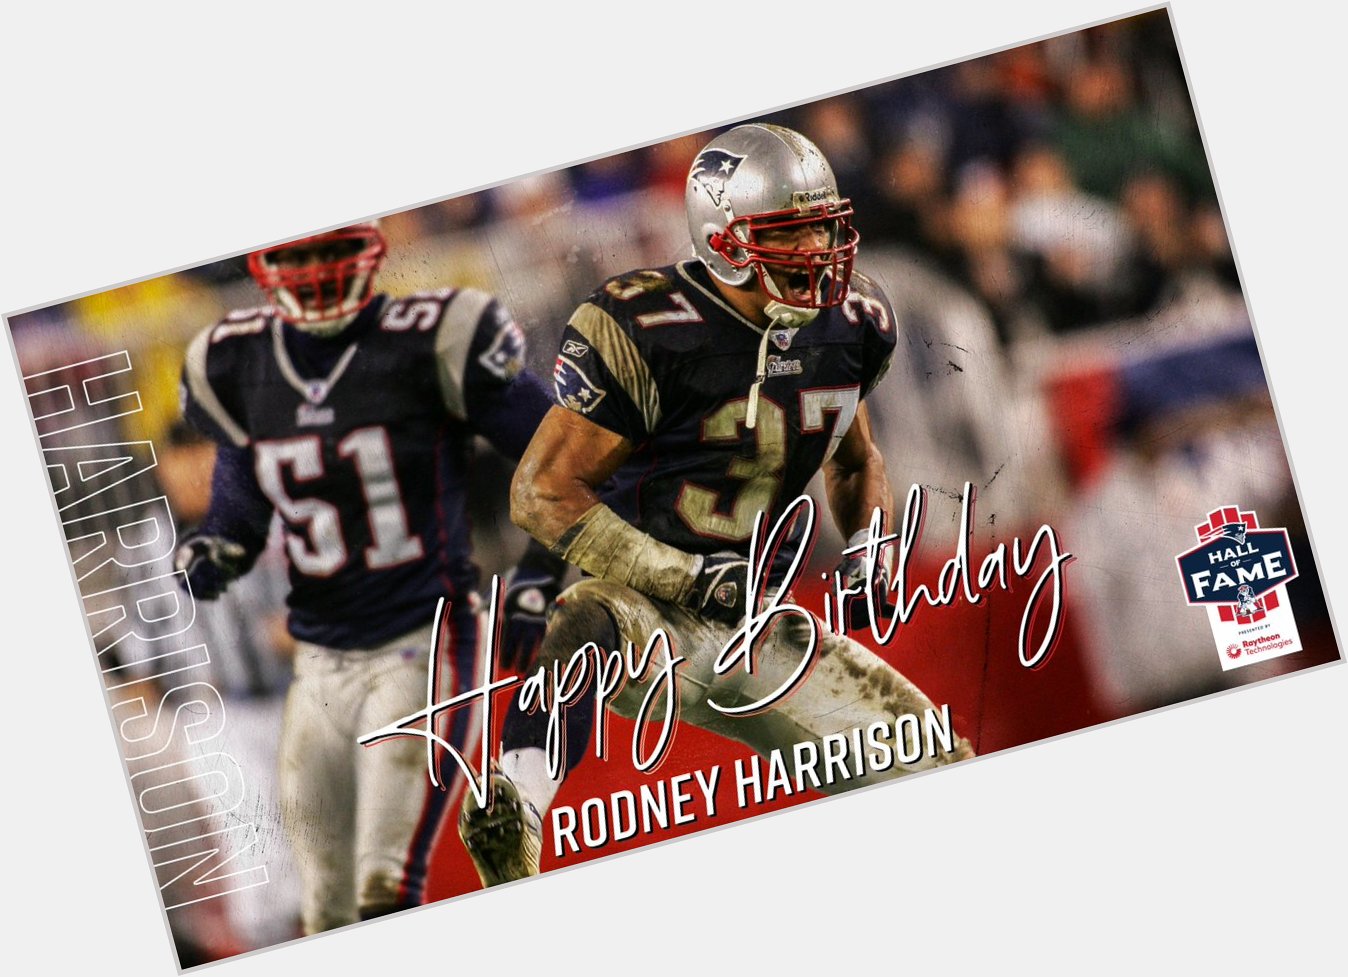 Happy birthday to the all-time leader in sacks by a defensive back, 